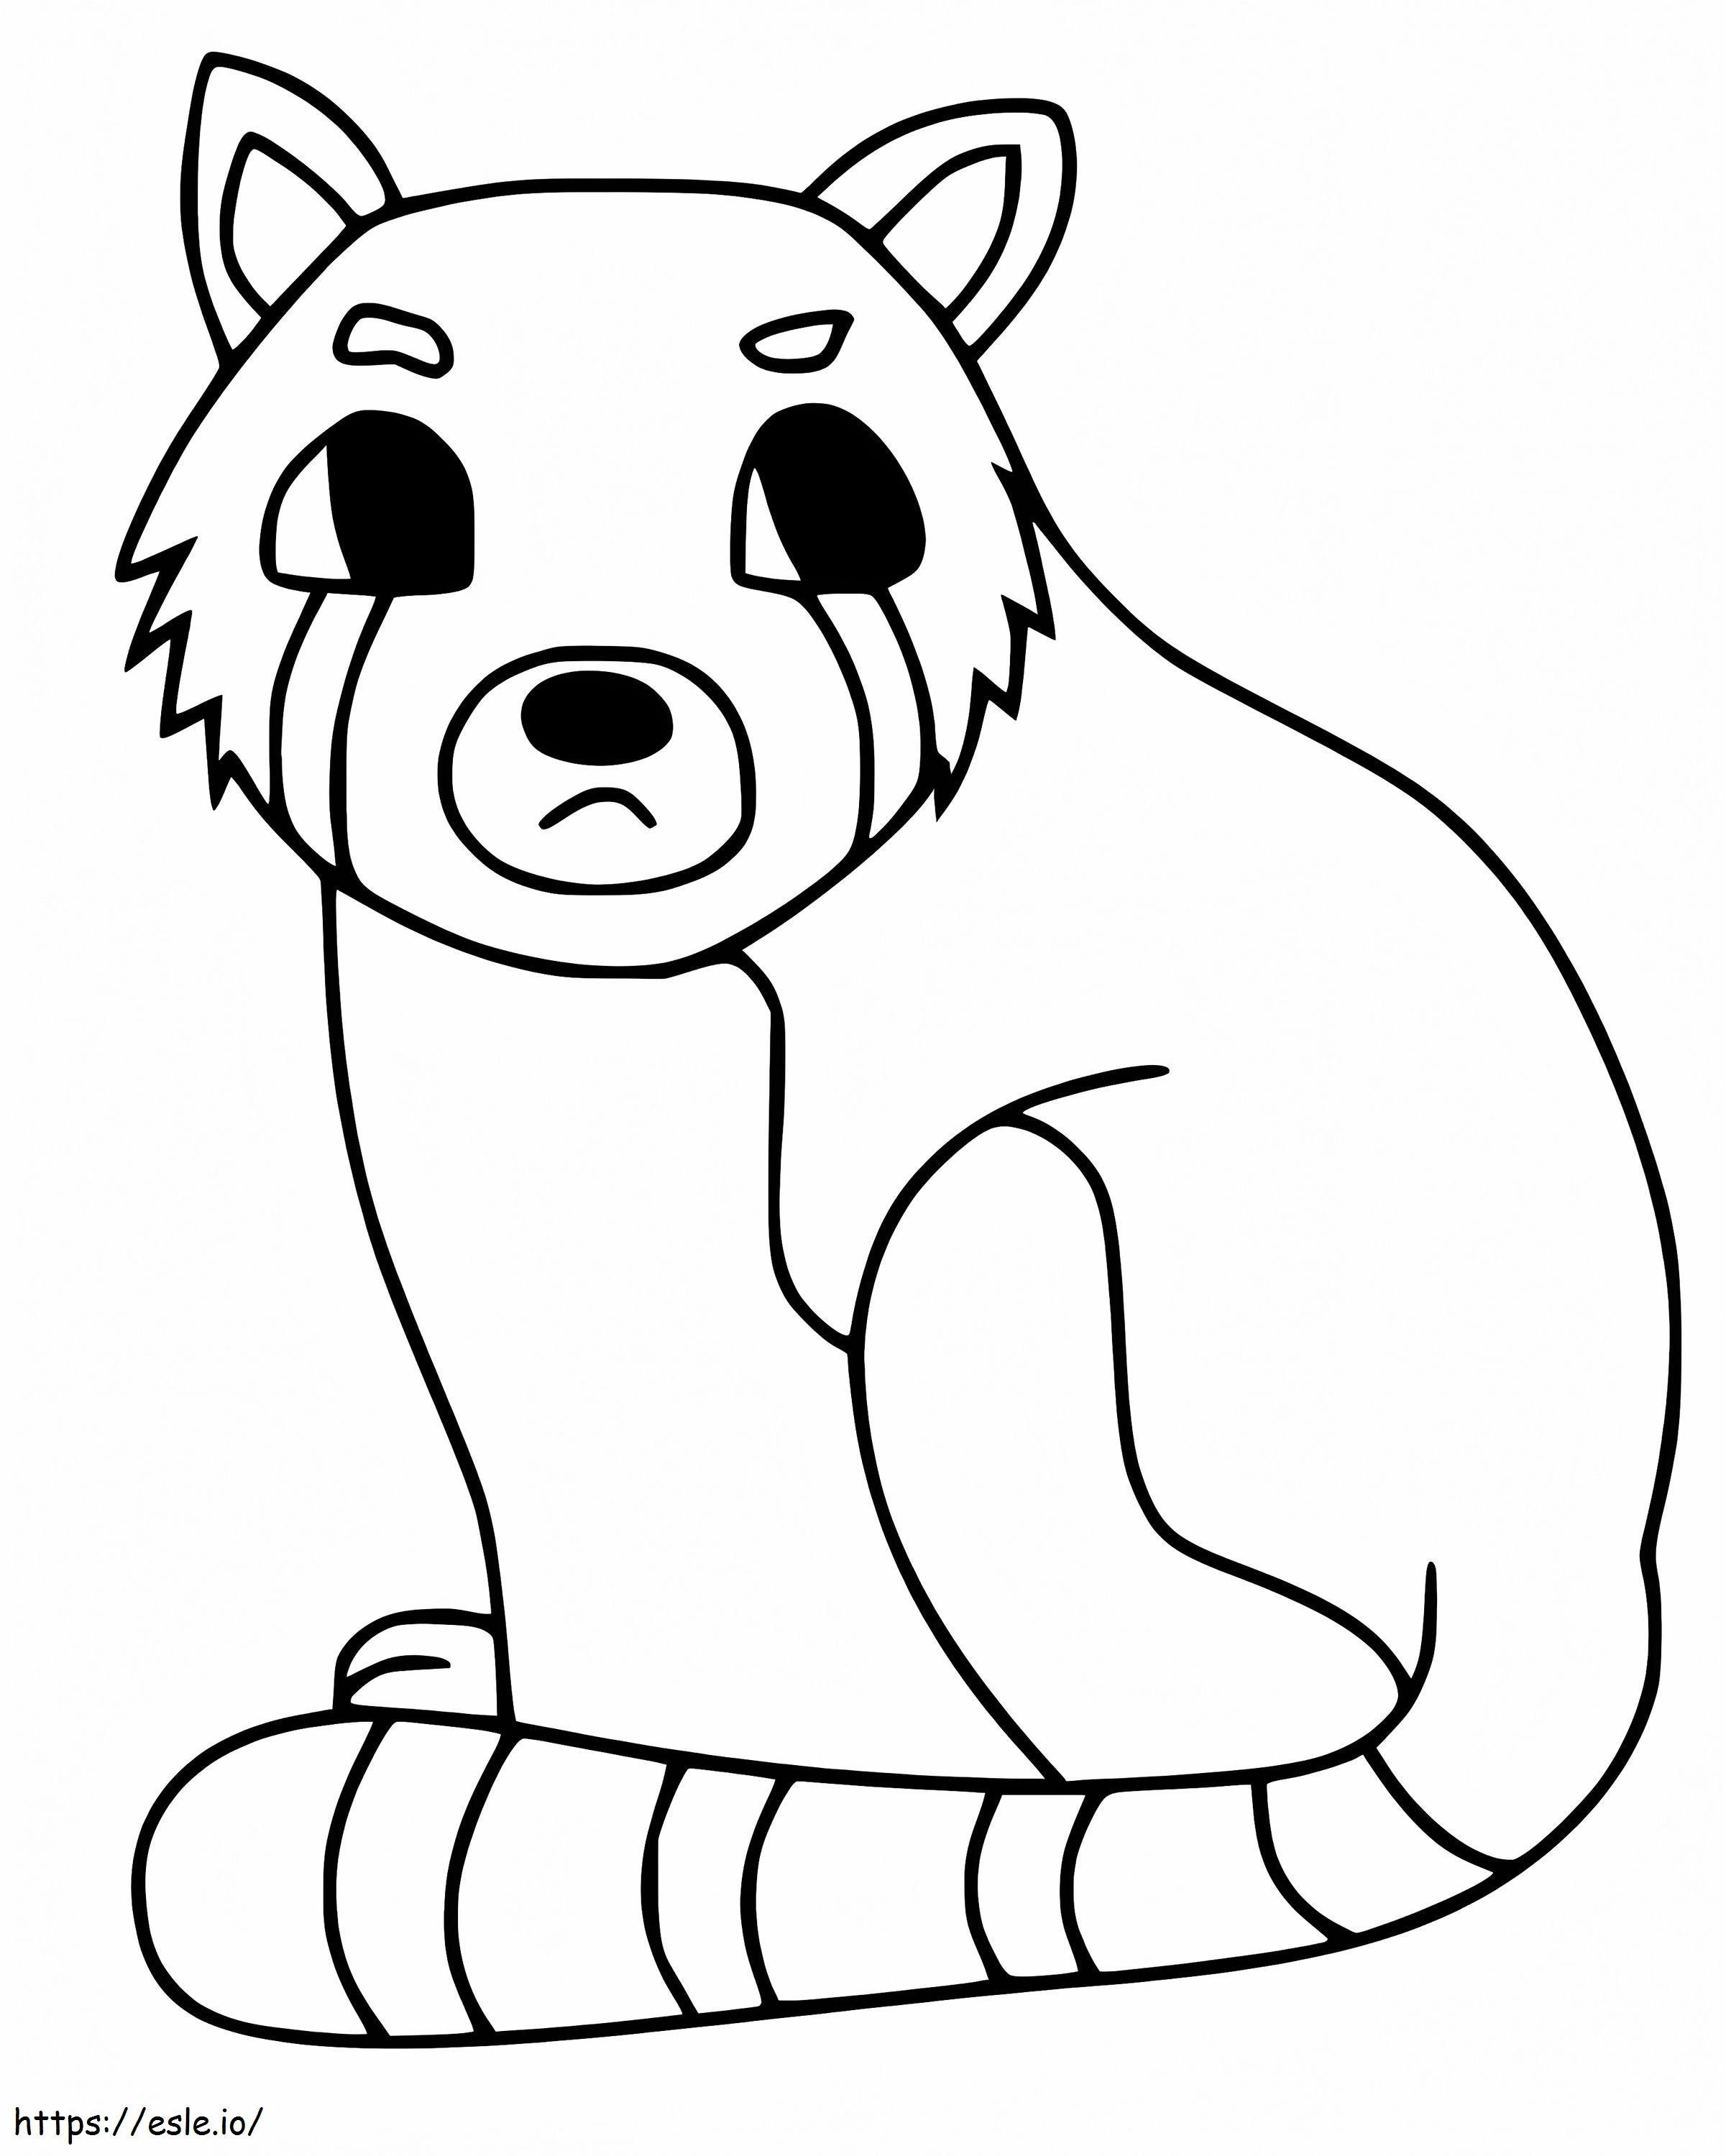 Simple Red Panda coloring page